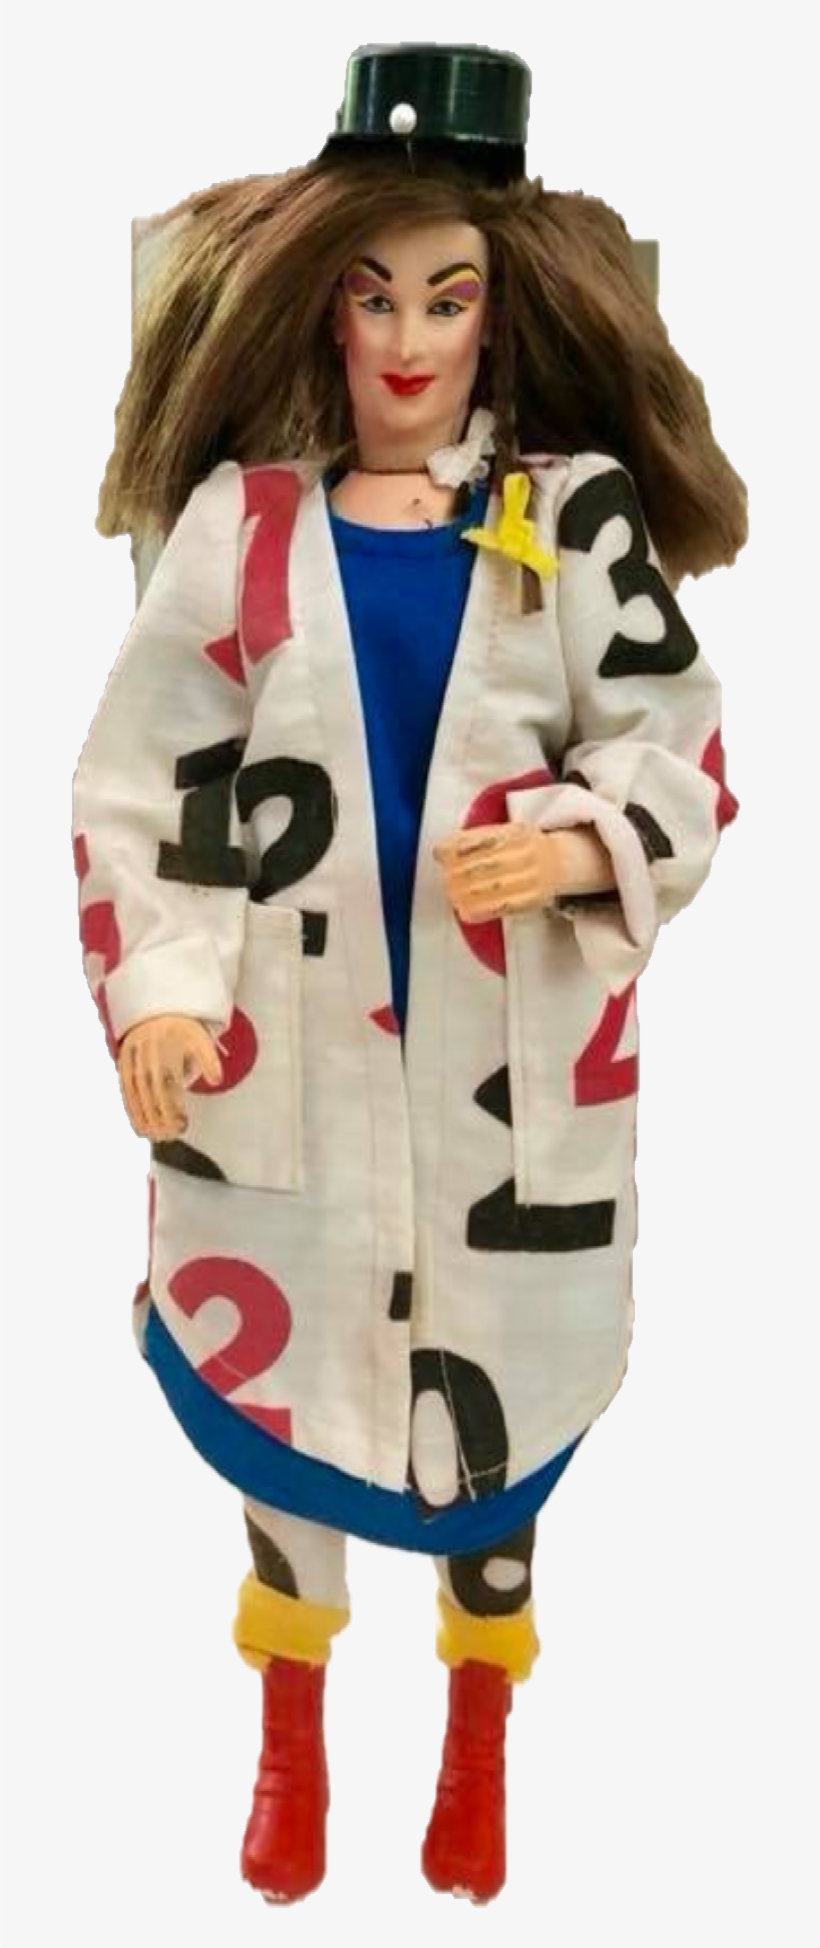 Compare The 12" Boy George Fashion Doll To The 10" - Costume Hat, transparent png #3339329